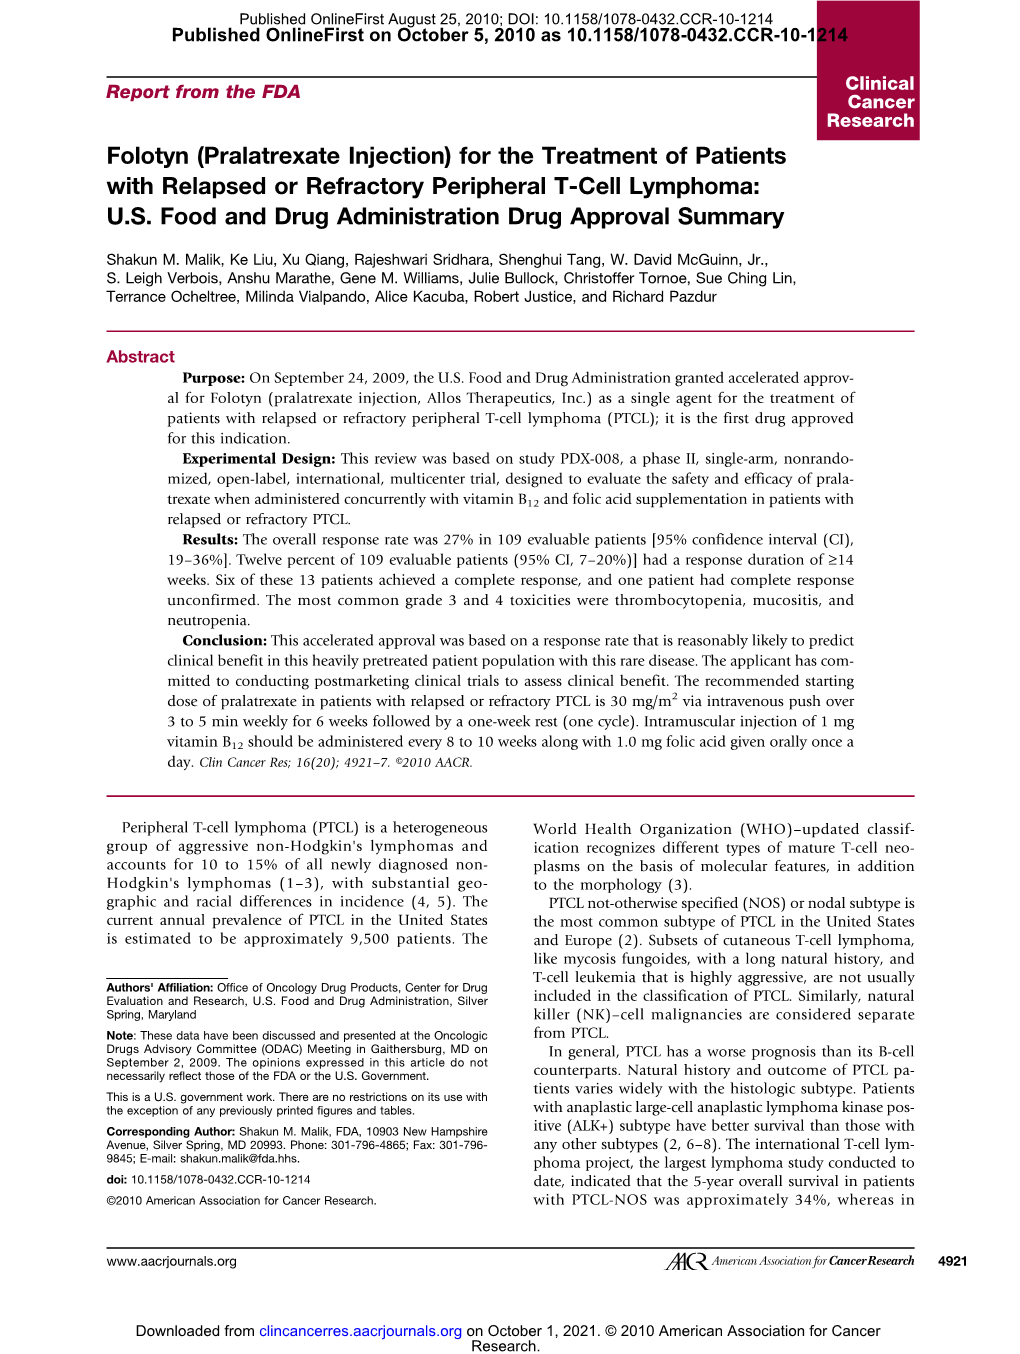 Folotyn (Pralatrexate Injection) for the Treatment of Patients with Relapsed Or Refractory Peripheral T-Cell Lymphoma: U.S